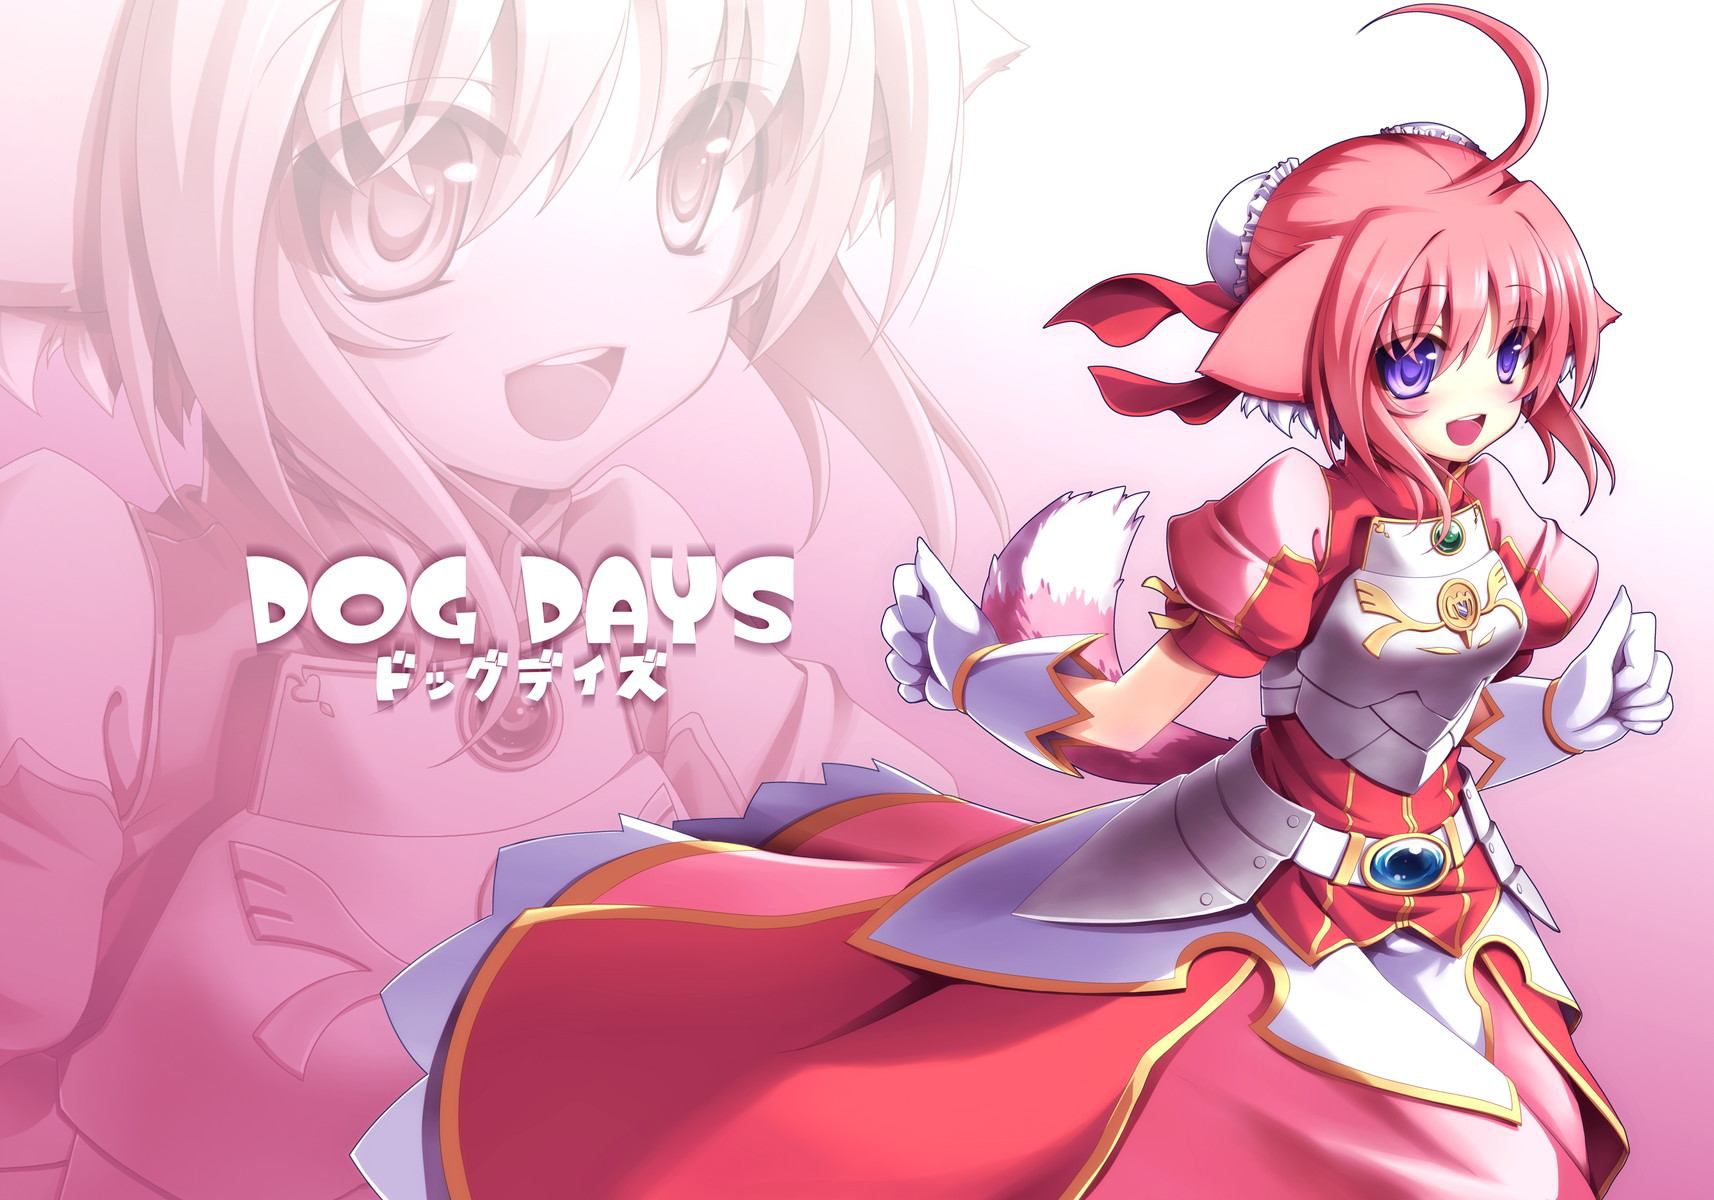 DOG DAYS millhiore F biscotti in one shot without you want 33